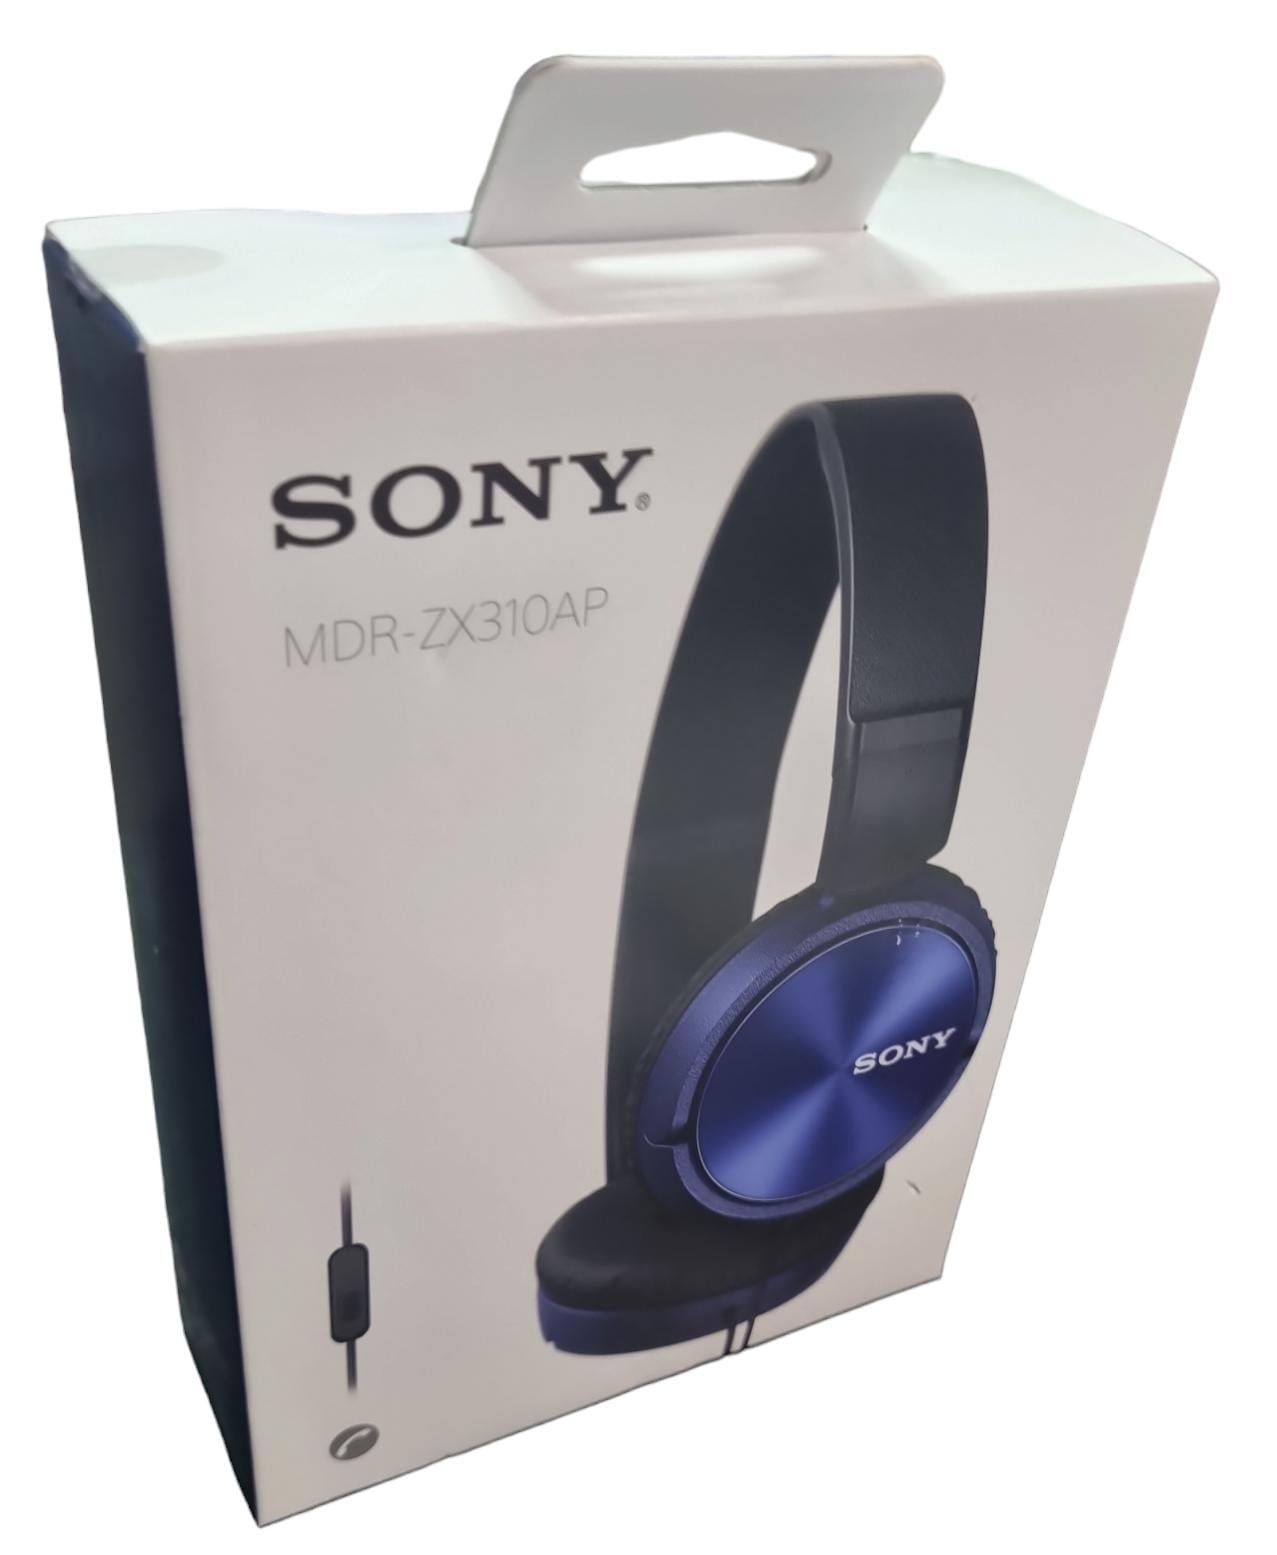 Sony MDR-ZX310AP Stereo Headphones - Blue - SEALED